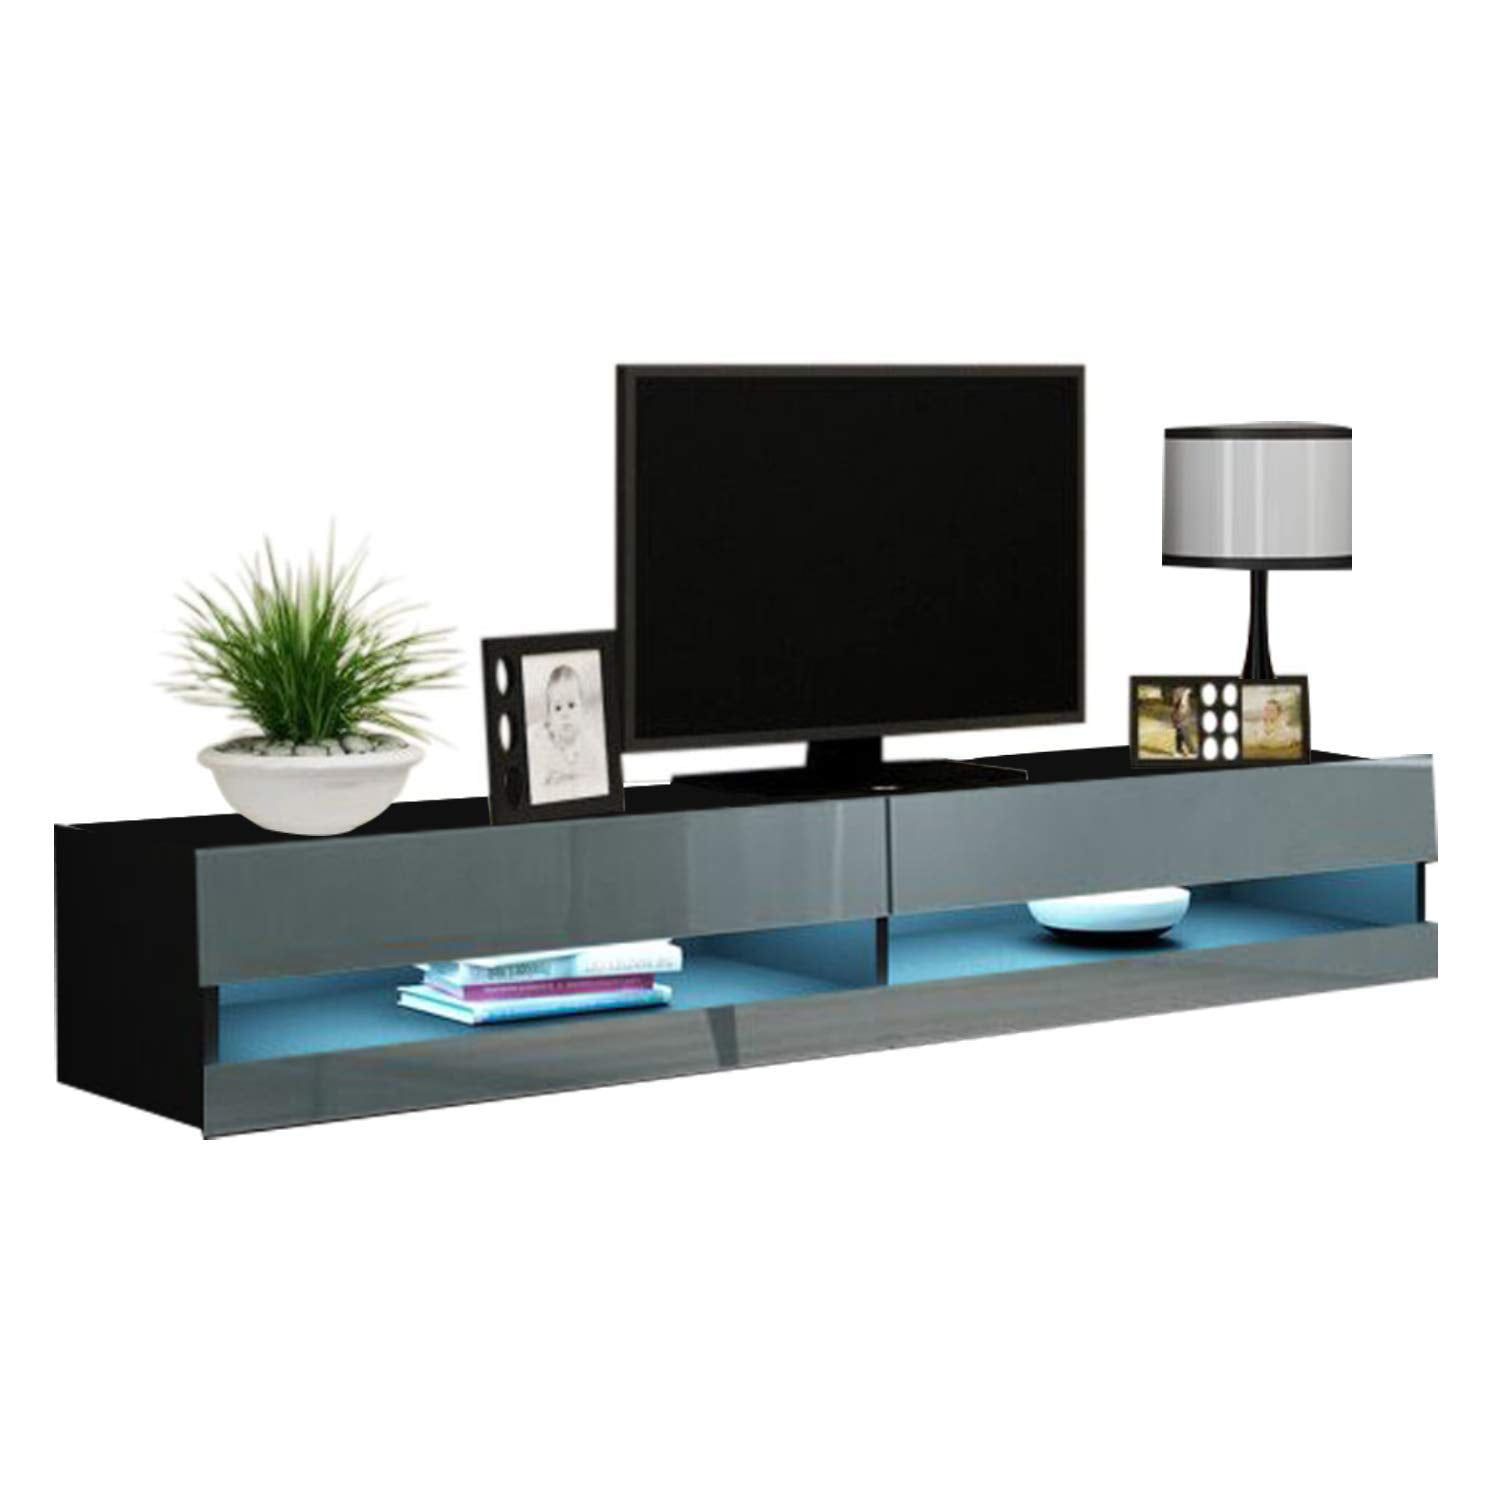 Vigo New 180 Led Wall Mounted 71" Floating Tv Stand, Black/gray Inside Wall Mounted Floating Tv Stands (Gallery 19 of 20)